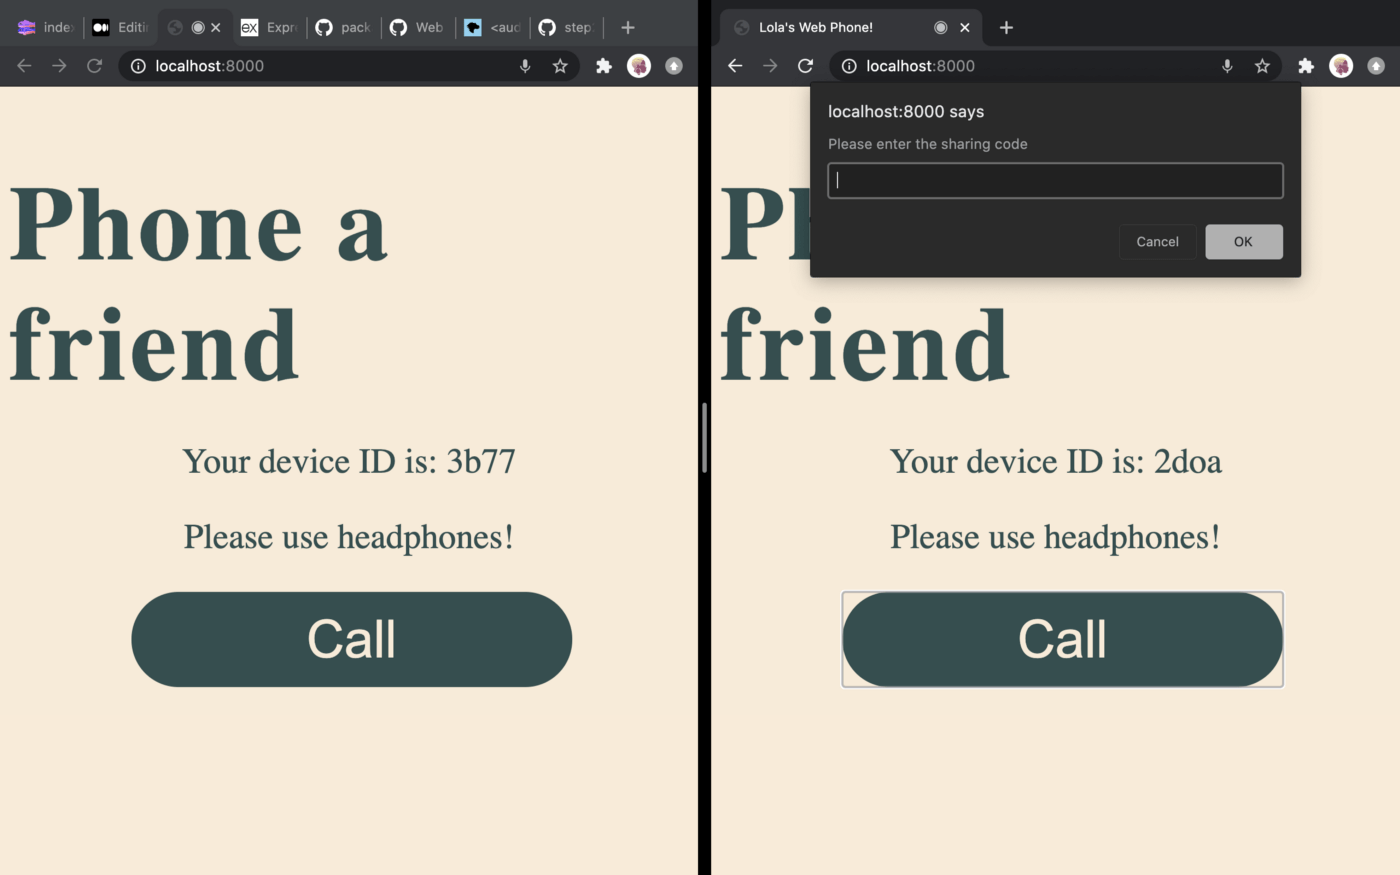 Two screens side by side both A cream background with the words 'phone a friend' in bold, dark green font as the heading. The first screen has 'Your device ID is: 3b77' and the second 'Your device ID is: 2doa', is immediately below the title and 'please use headphones!' below that. Following on, a big dark green button with 'Call' written in the same cream color of the background. The second screen has a browser dialogue that asks for a peer id.